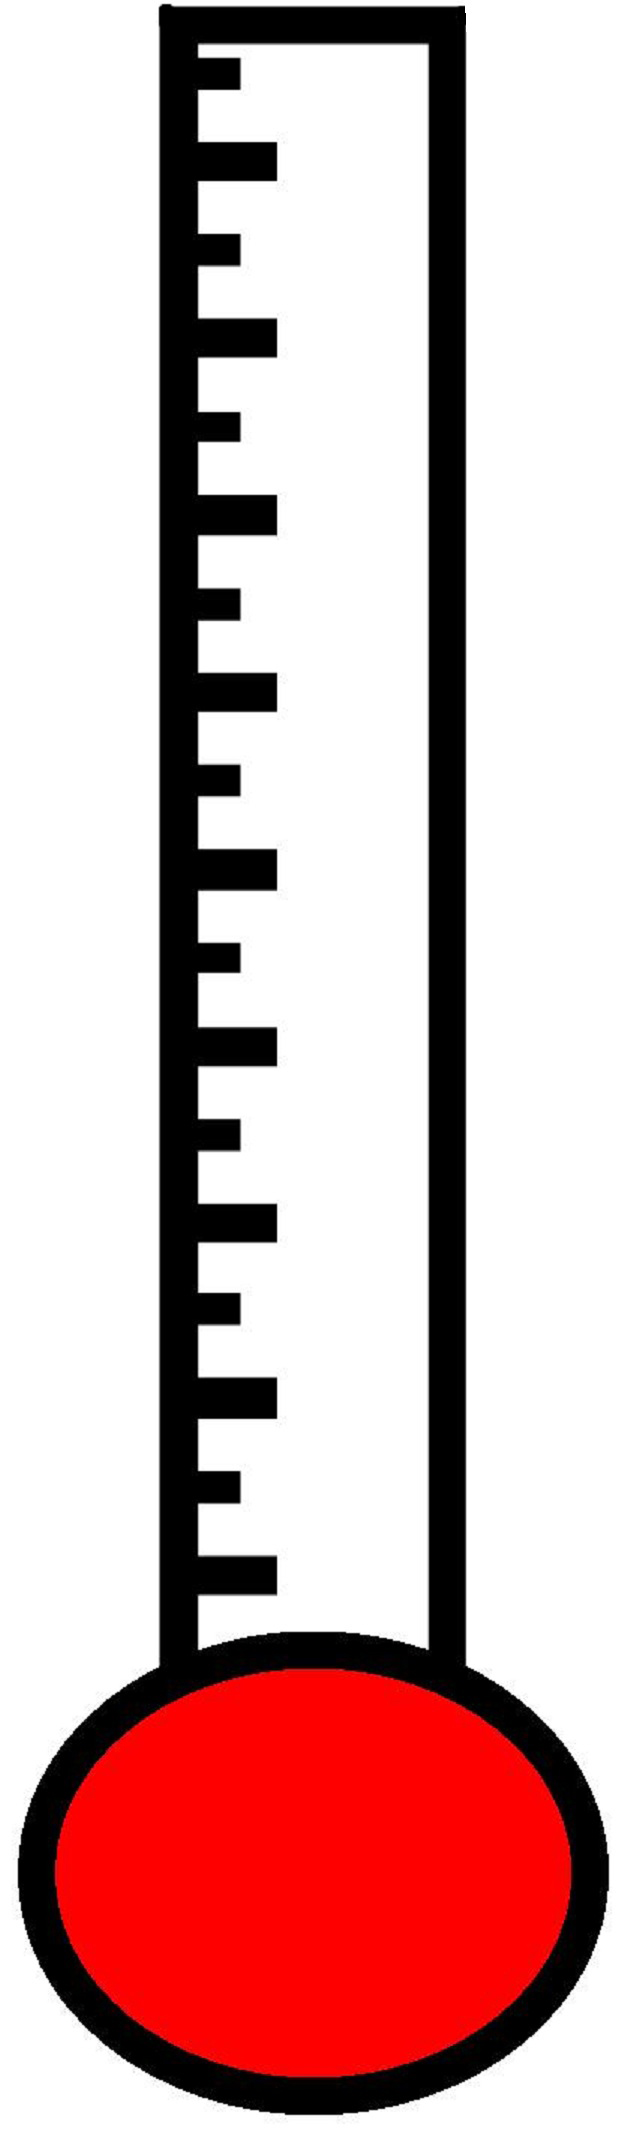 Blank Fundraising Thermometer Template | Free Download Clip Art ...